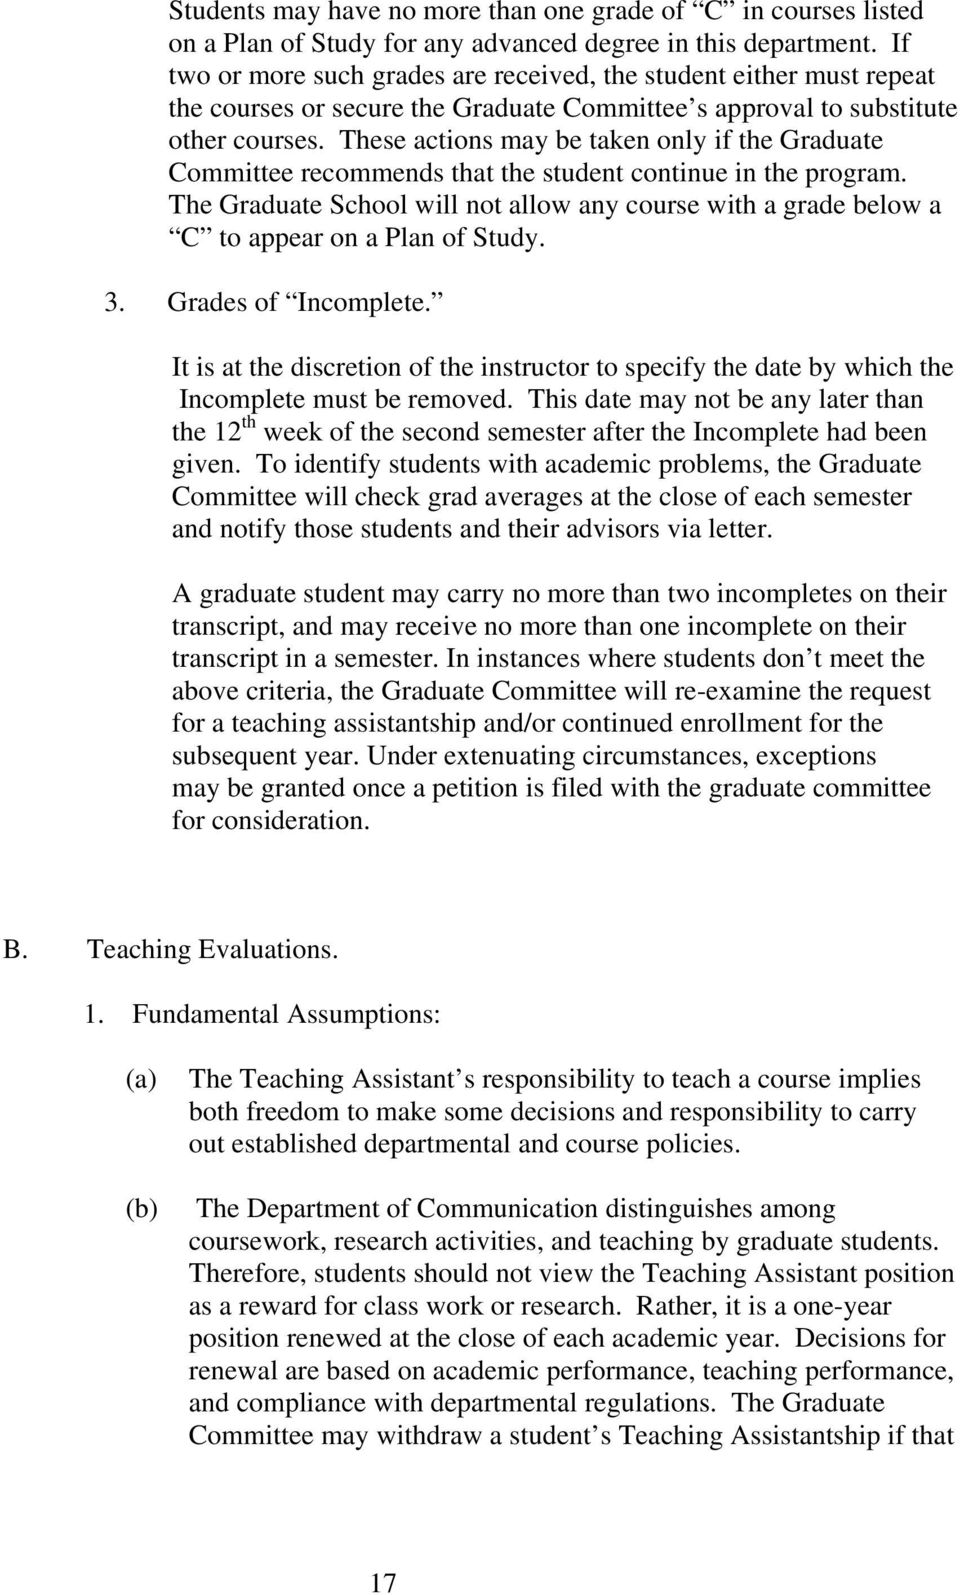 These actions may be taken only if the Graduate Committee recommends that the student continue in the program.